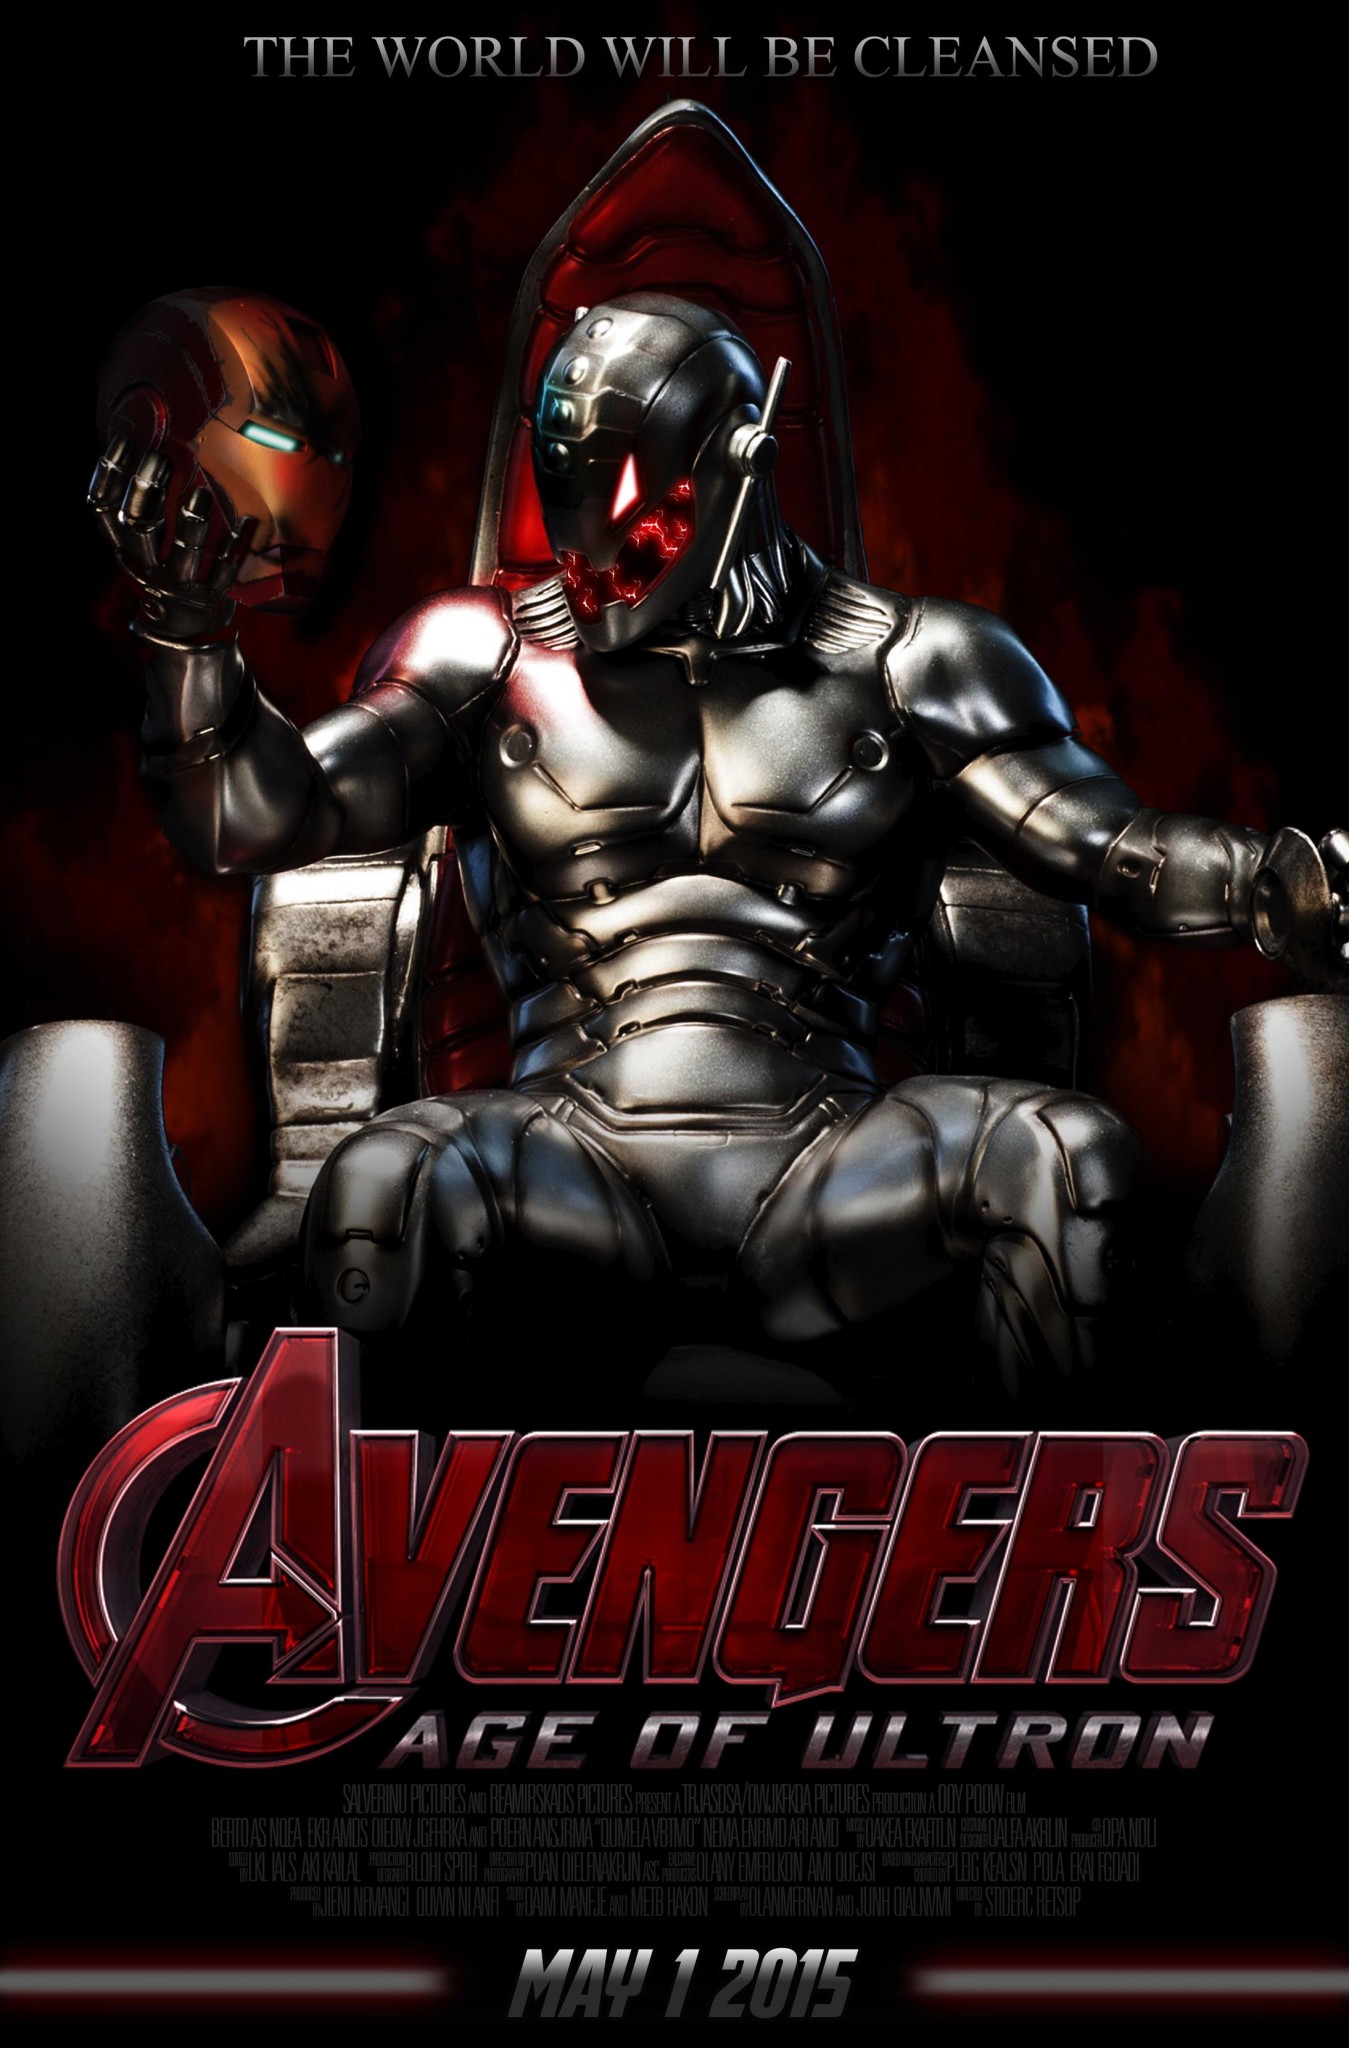 Marvel’s Avengers: Age of Ultron Contest Challenge